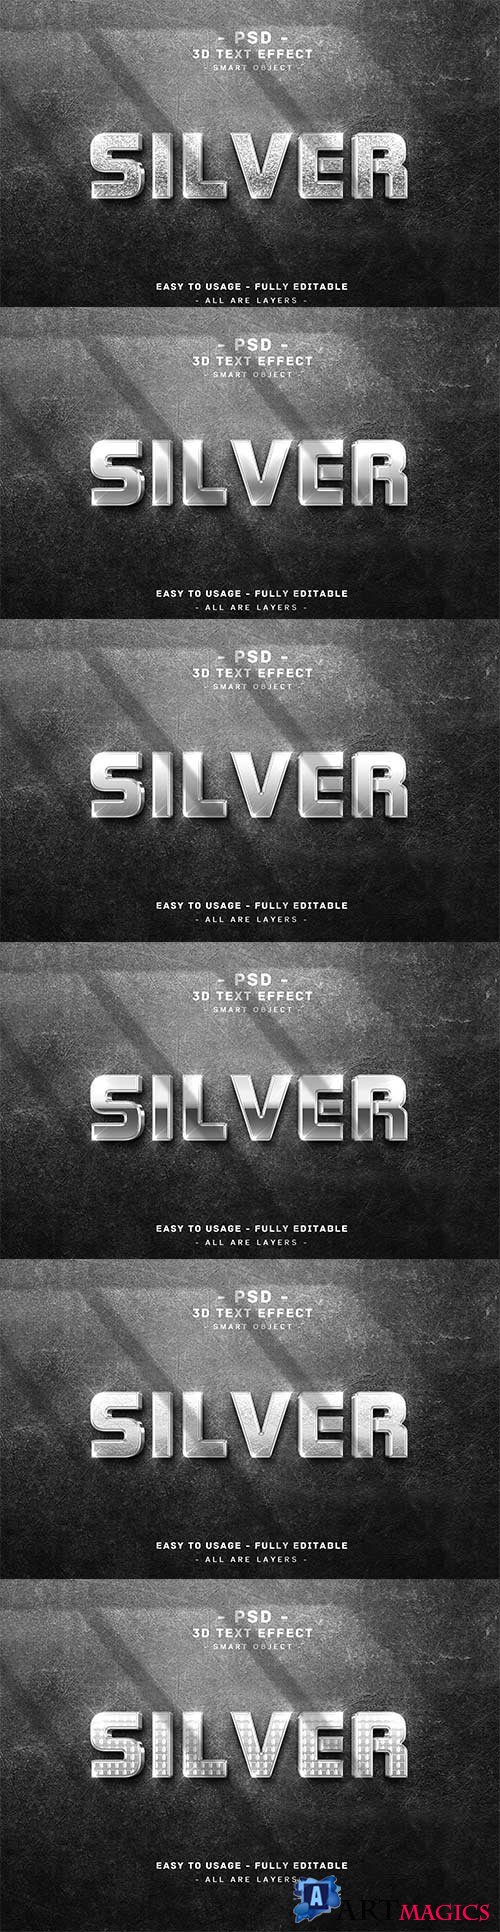 3d silver text style effect on wall premium psd